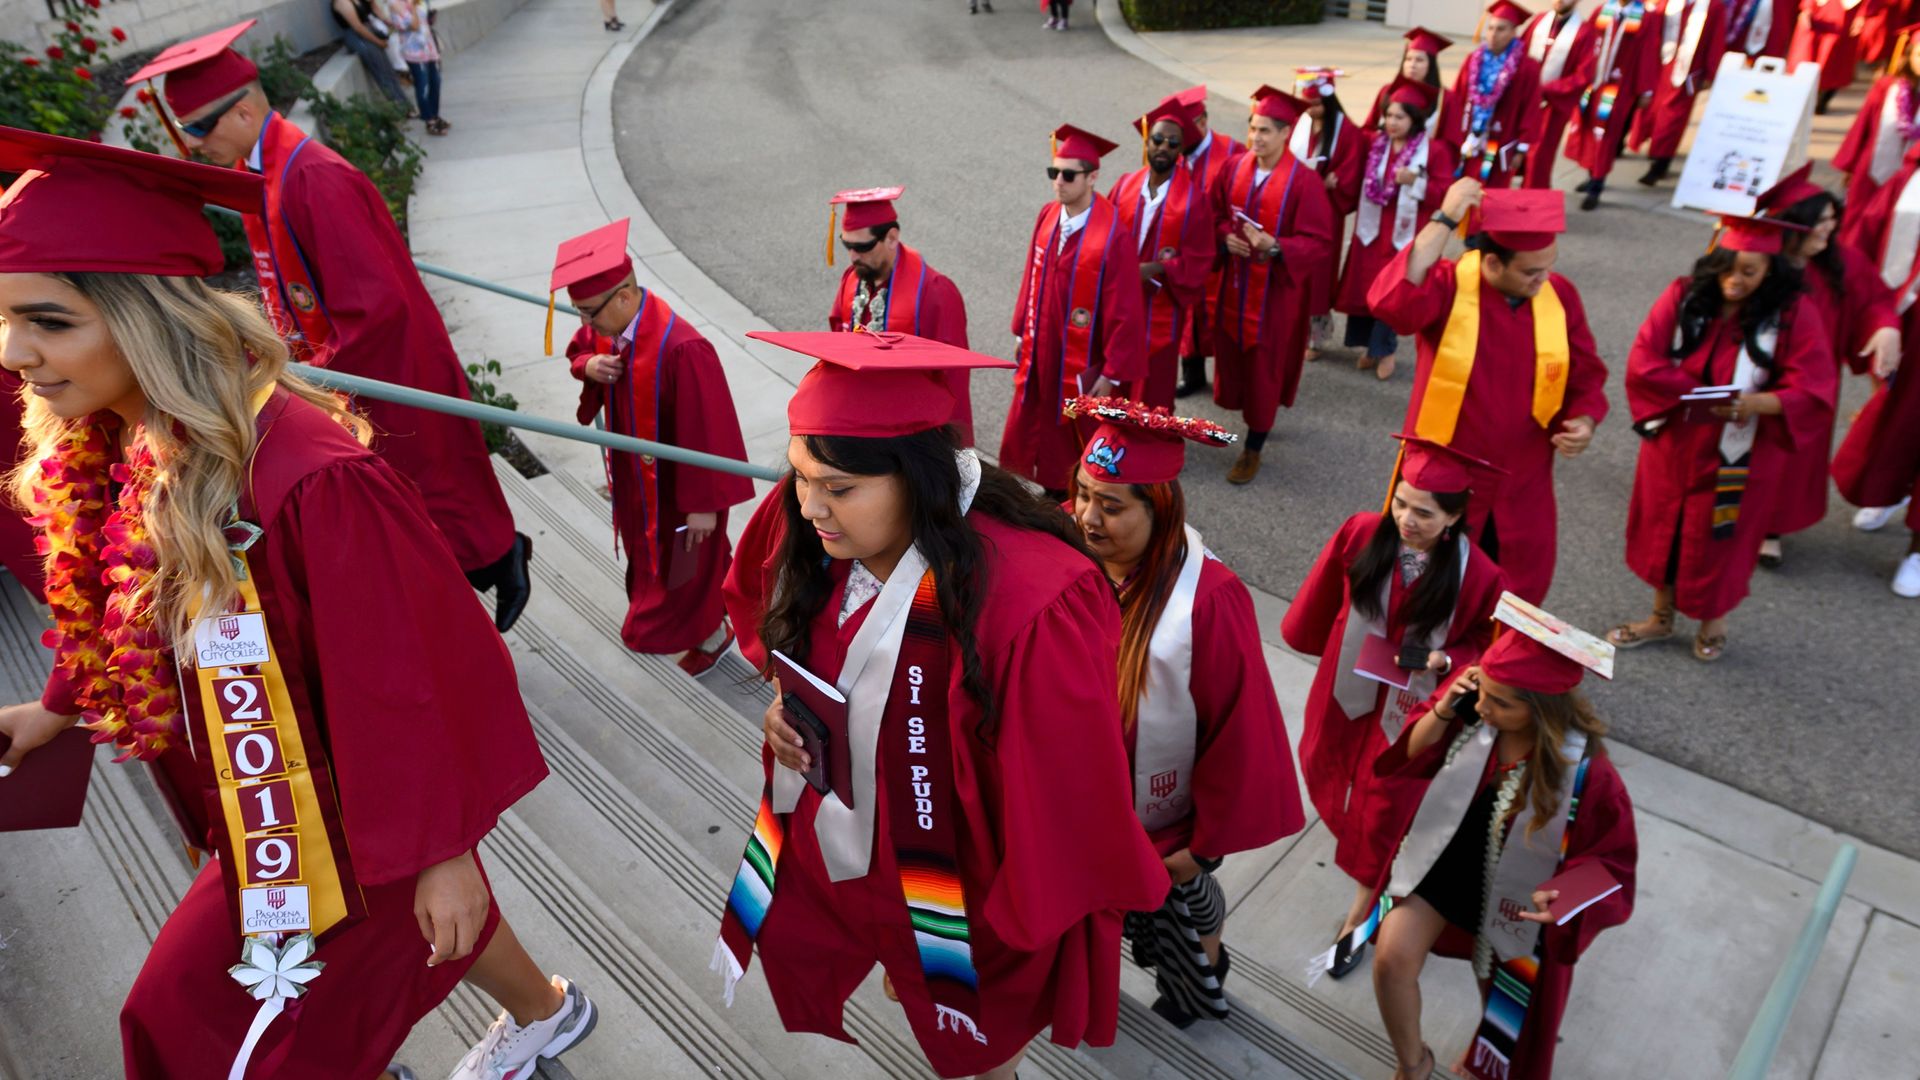 Students earning degrees at Pasadena City College participate in the graduation ceremony